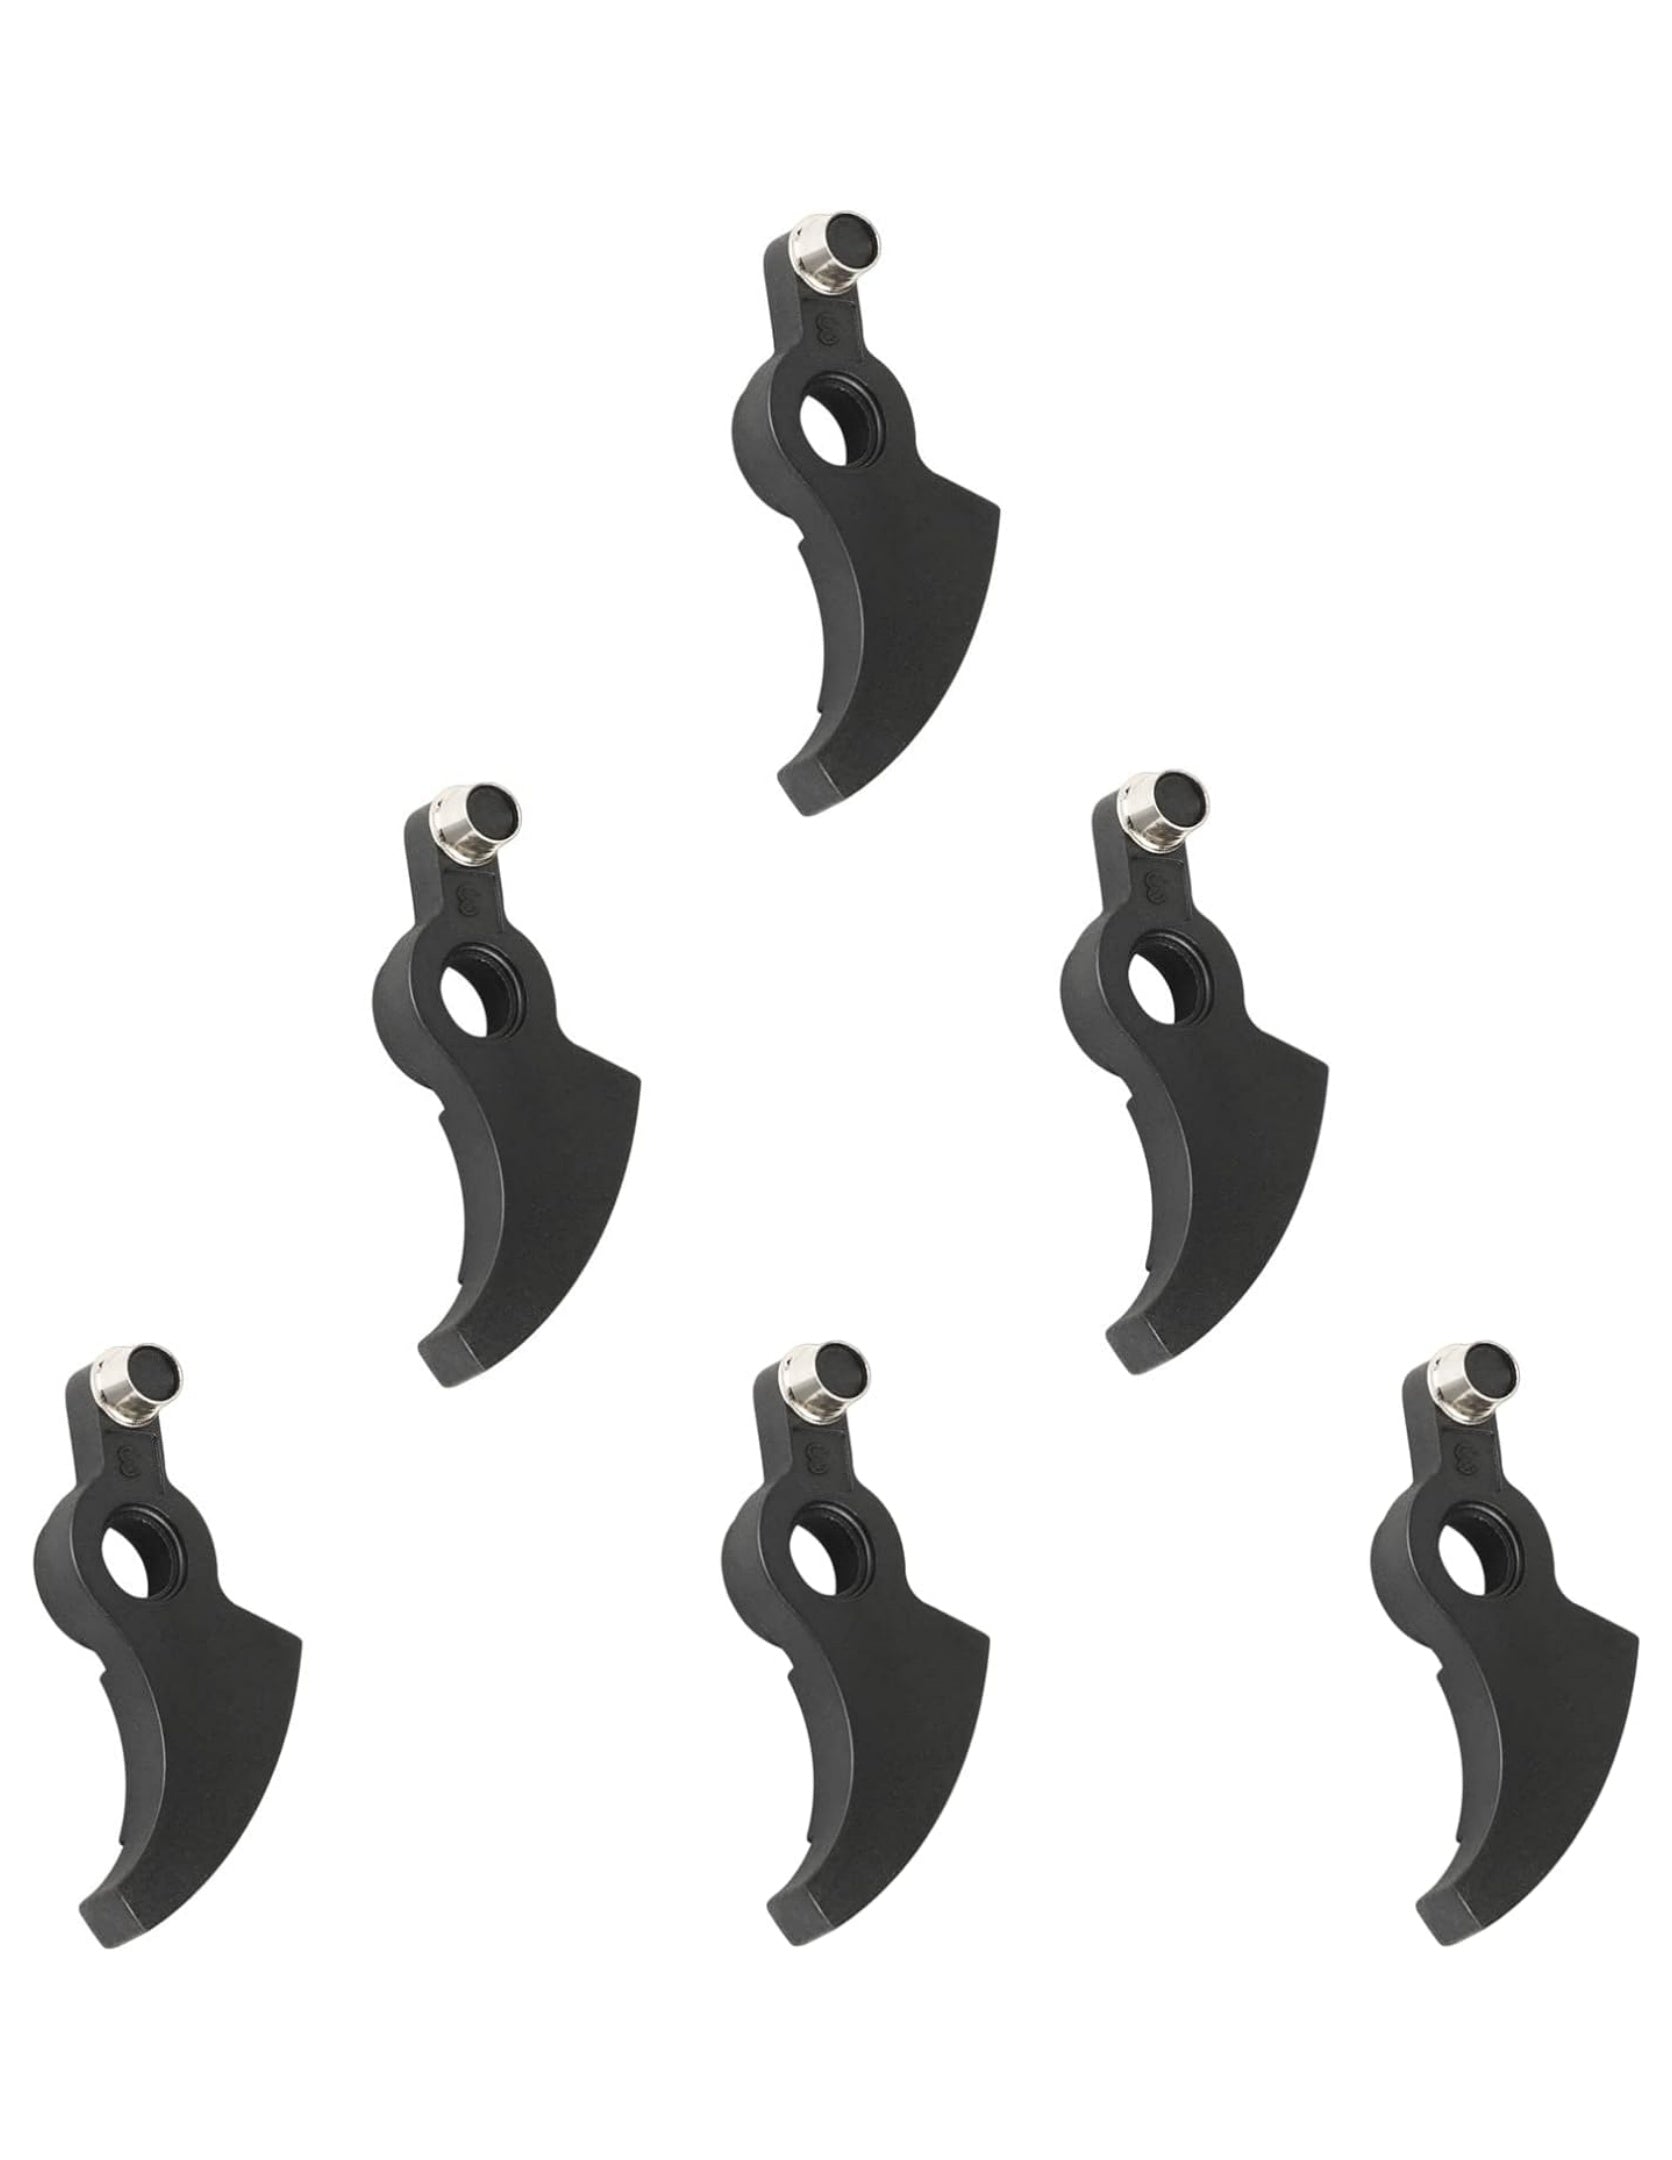 THTEN 90567077 Replacement Trimmer Lever Compatible with Black & Decker NST2118 18V,LST220 20V, LST136 36V, LST300, LST522 Trimmers Models (6 Pack)